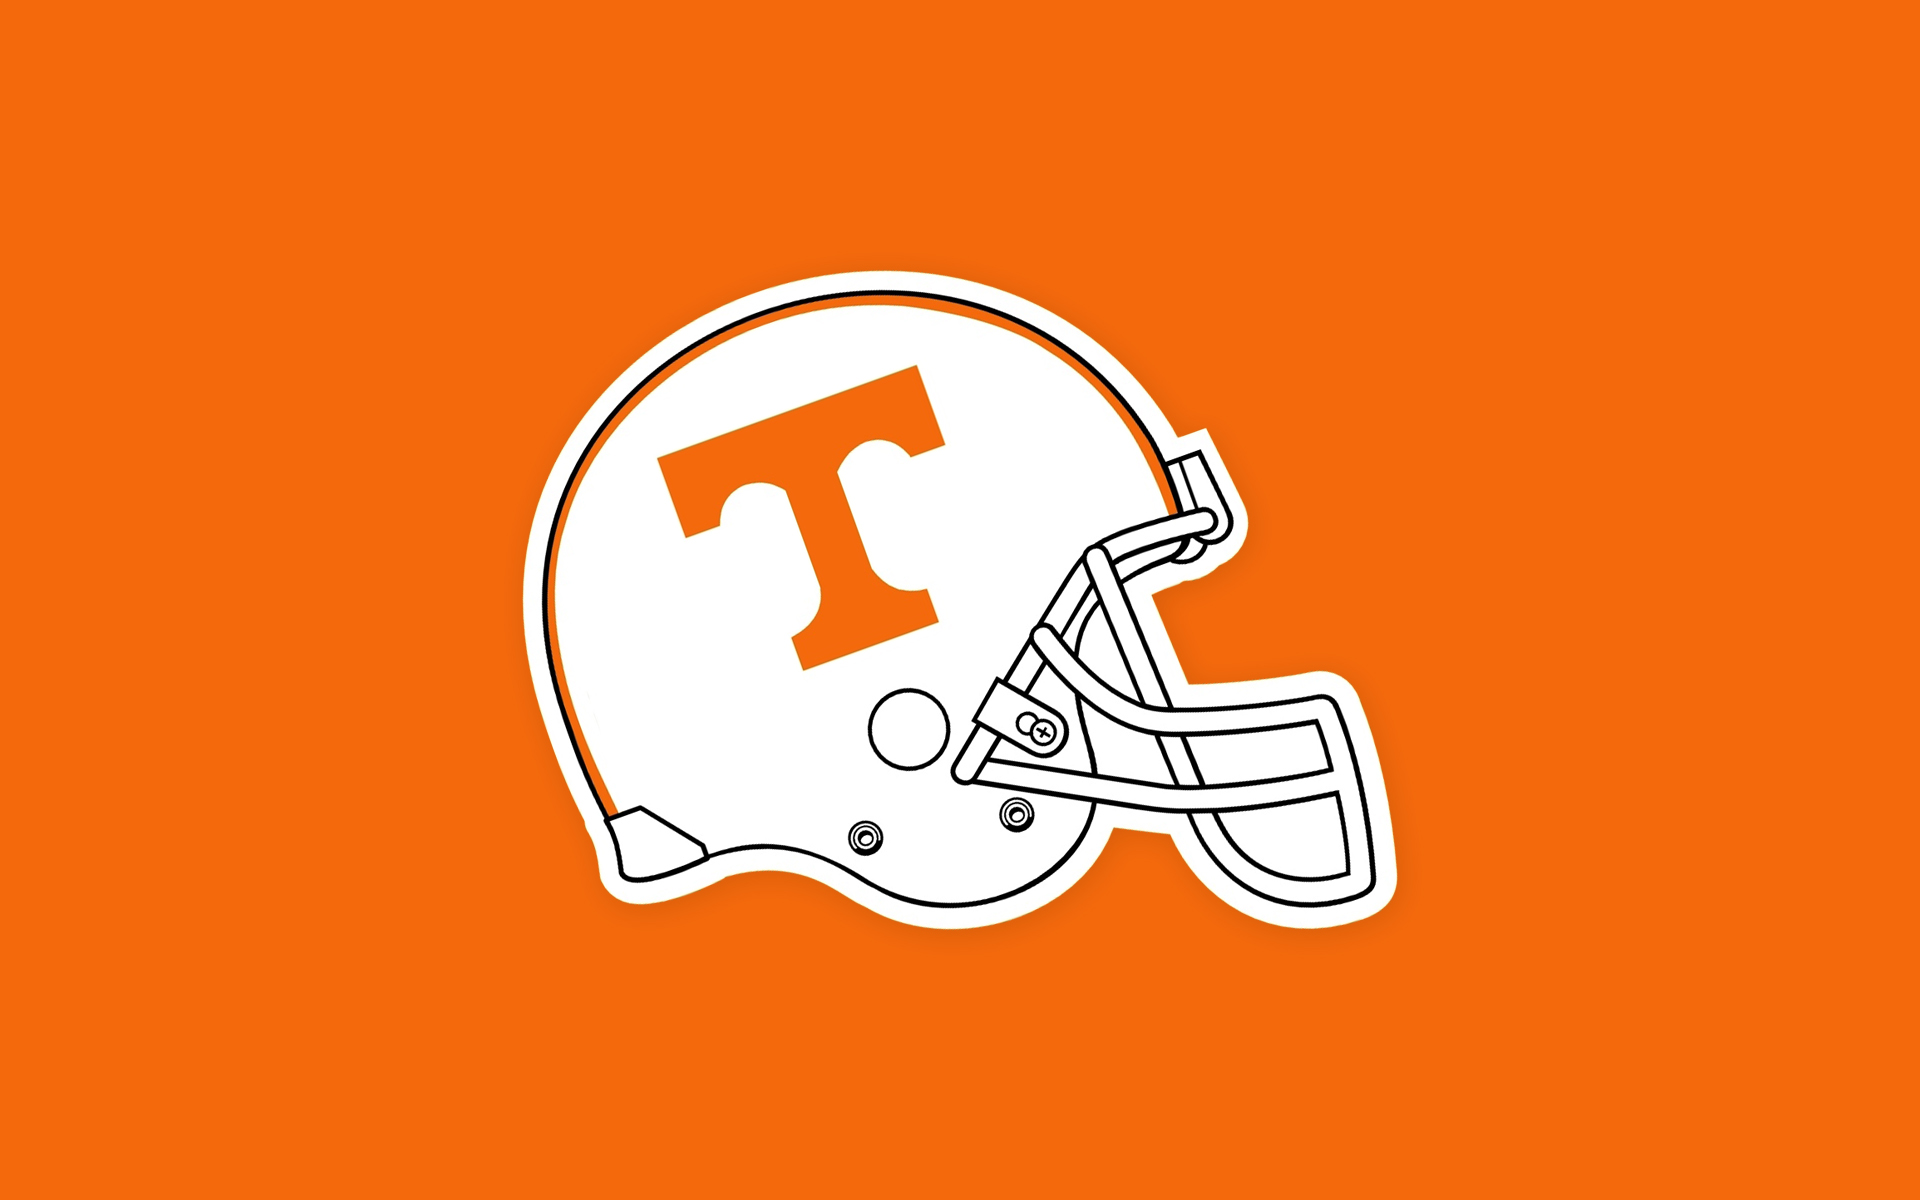 Sports Themed Wallpapers By Jhartle Droidforums
nike - Logo Wallpaper Tennessee Football - HD Wallpaper 